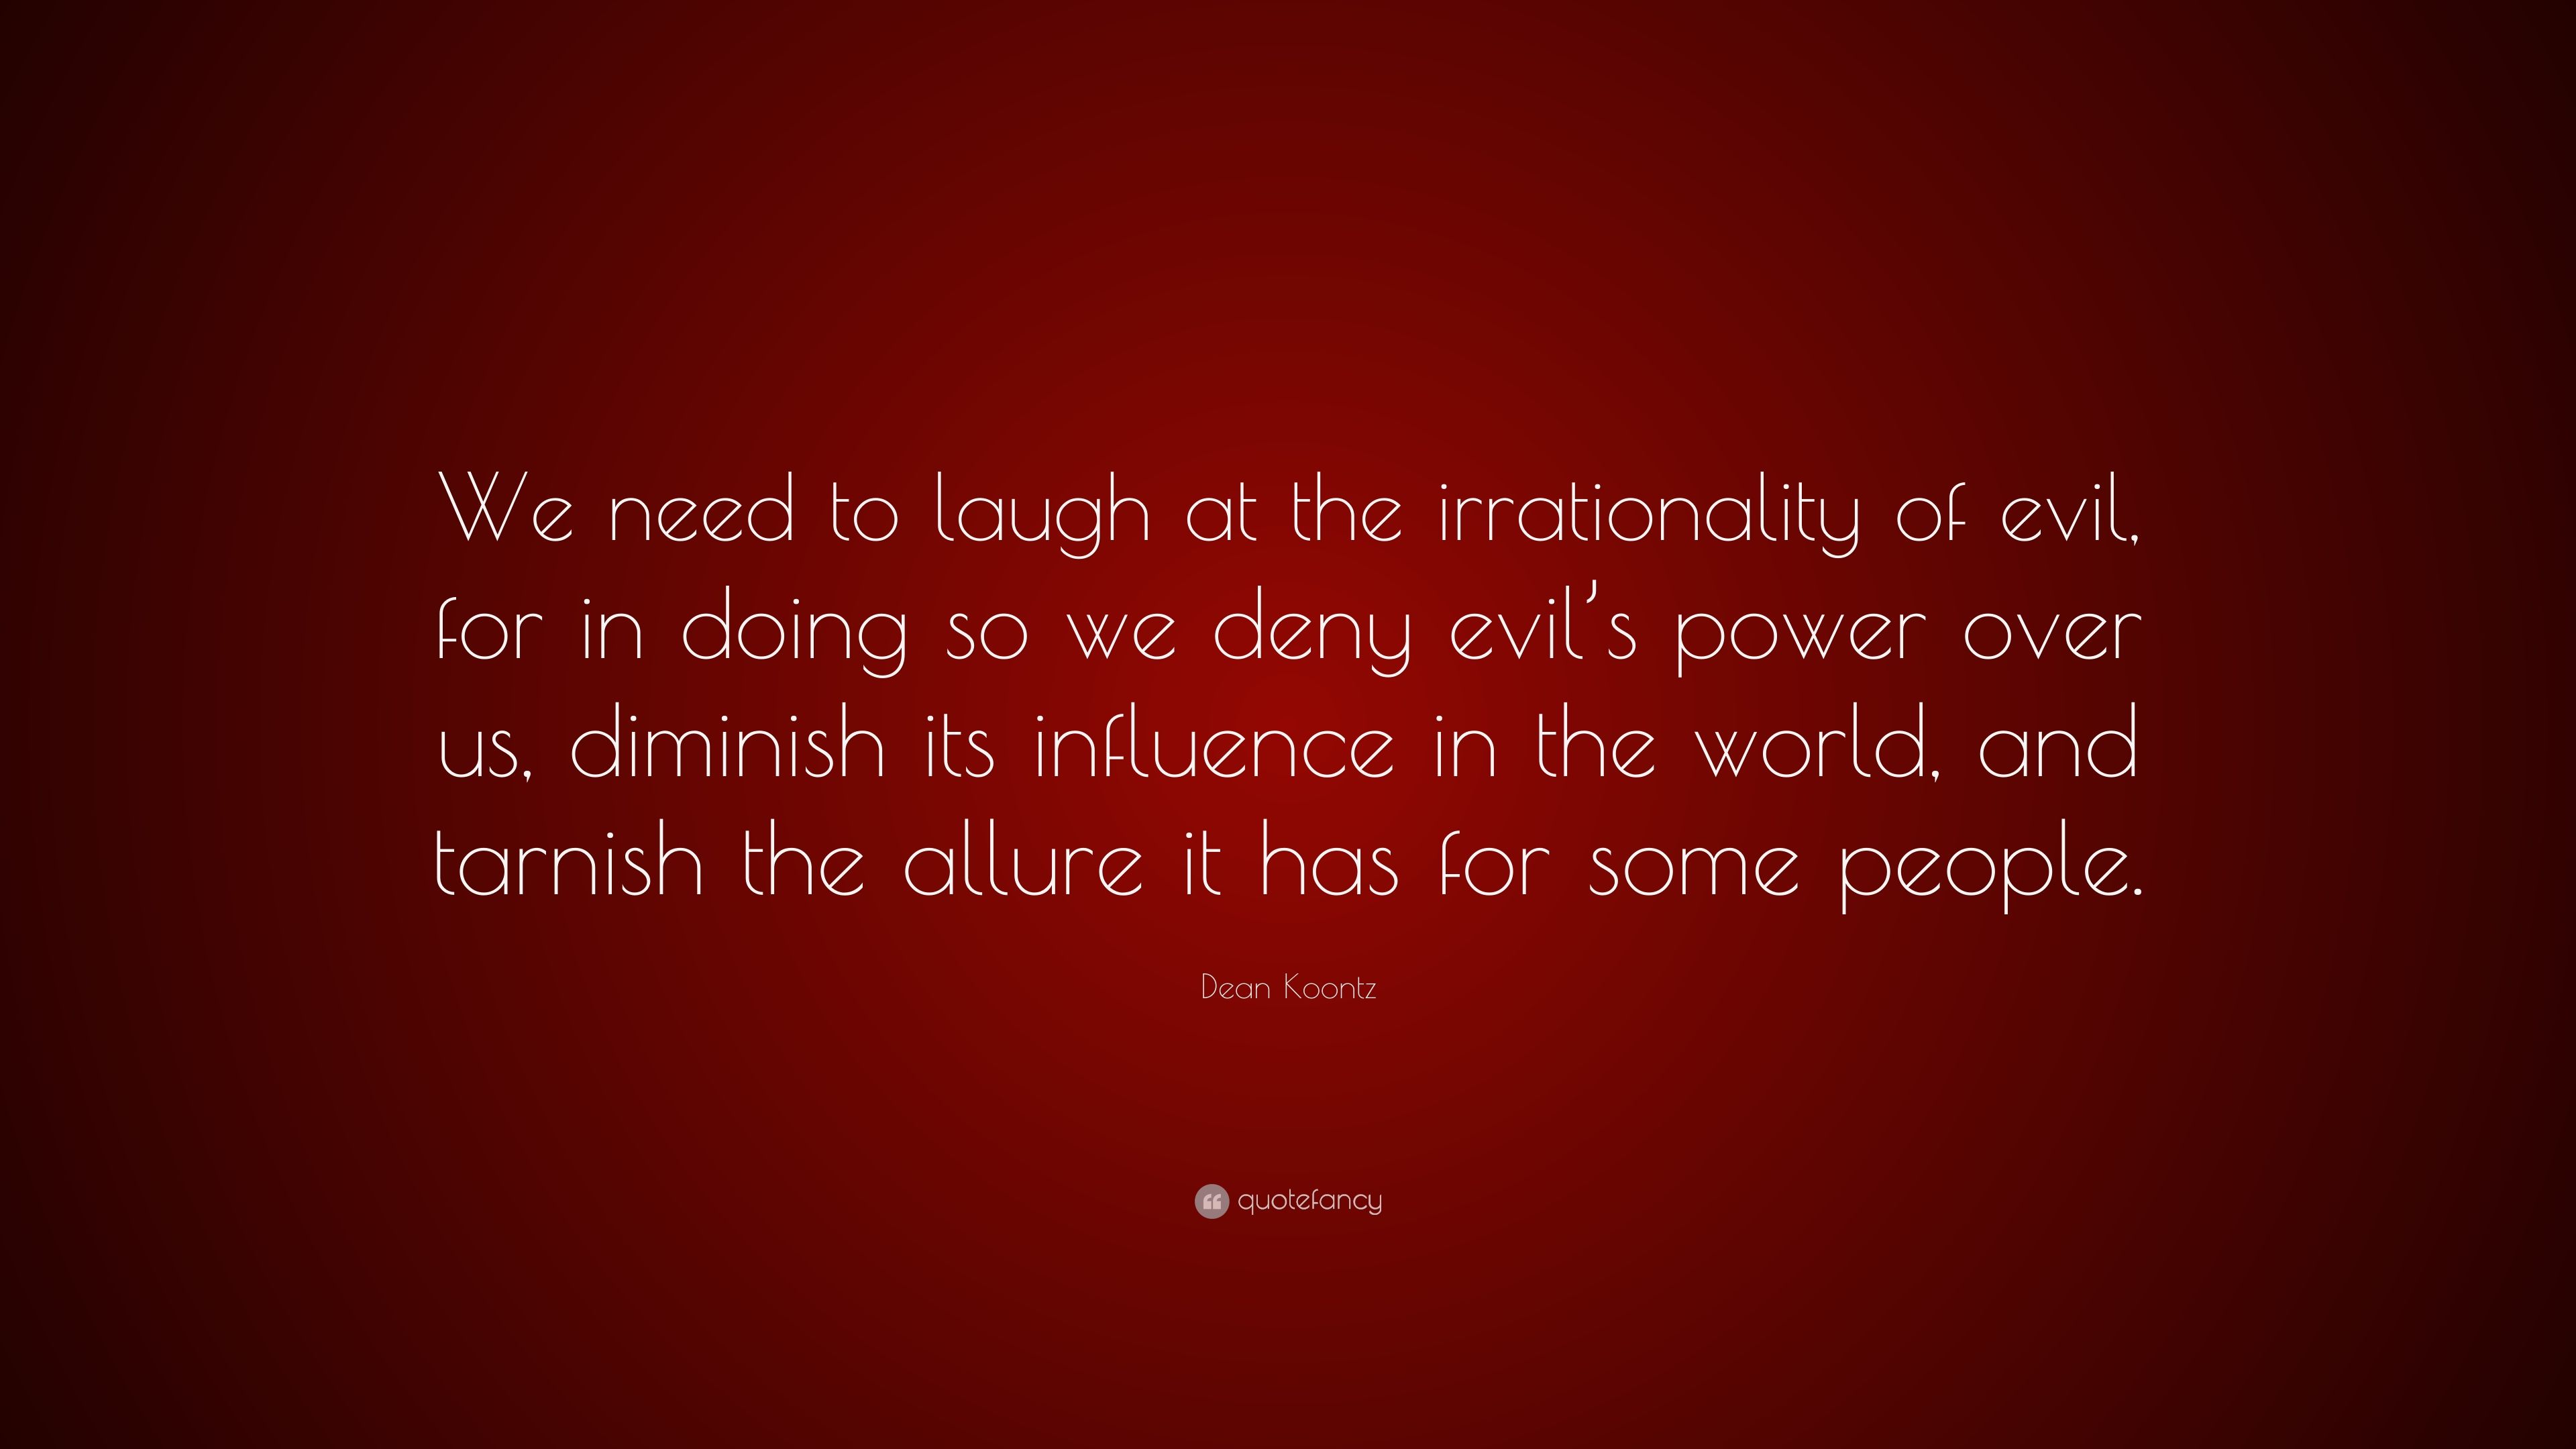 Dean Koontz Quote: “We need to laugh at the irrationality of evil